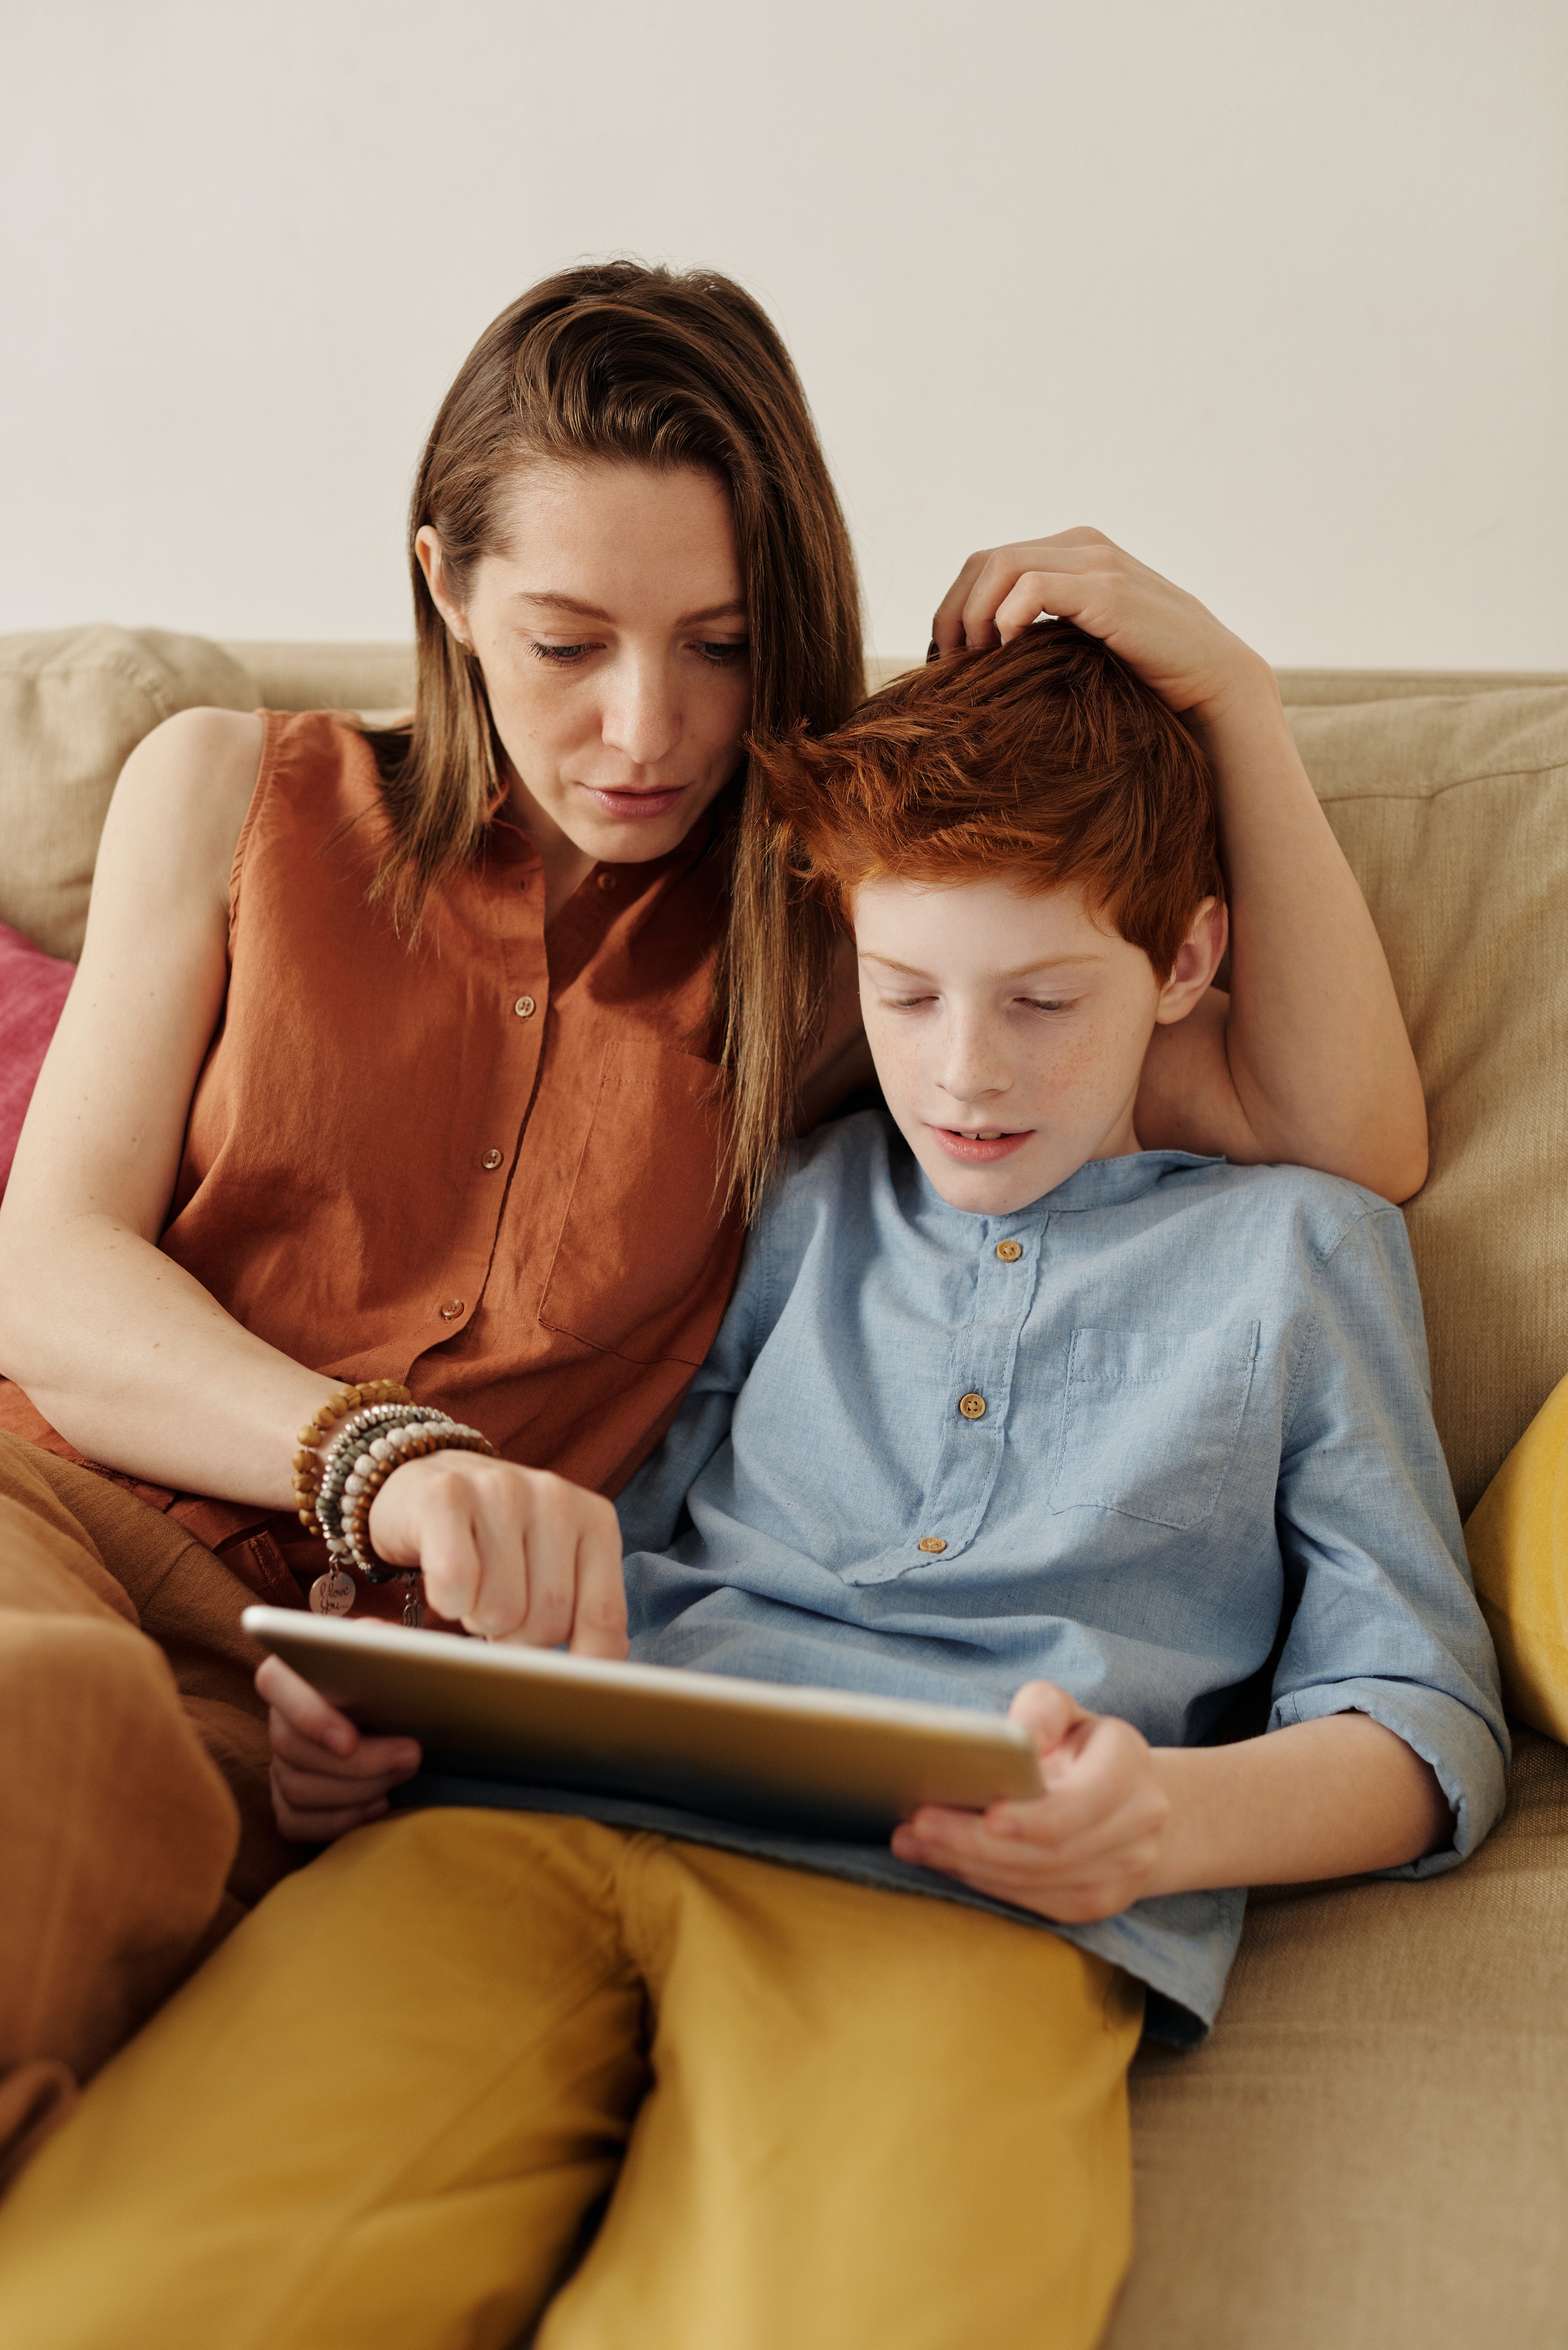 His son had his iPad for over two years. | Source: Pexels